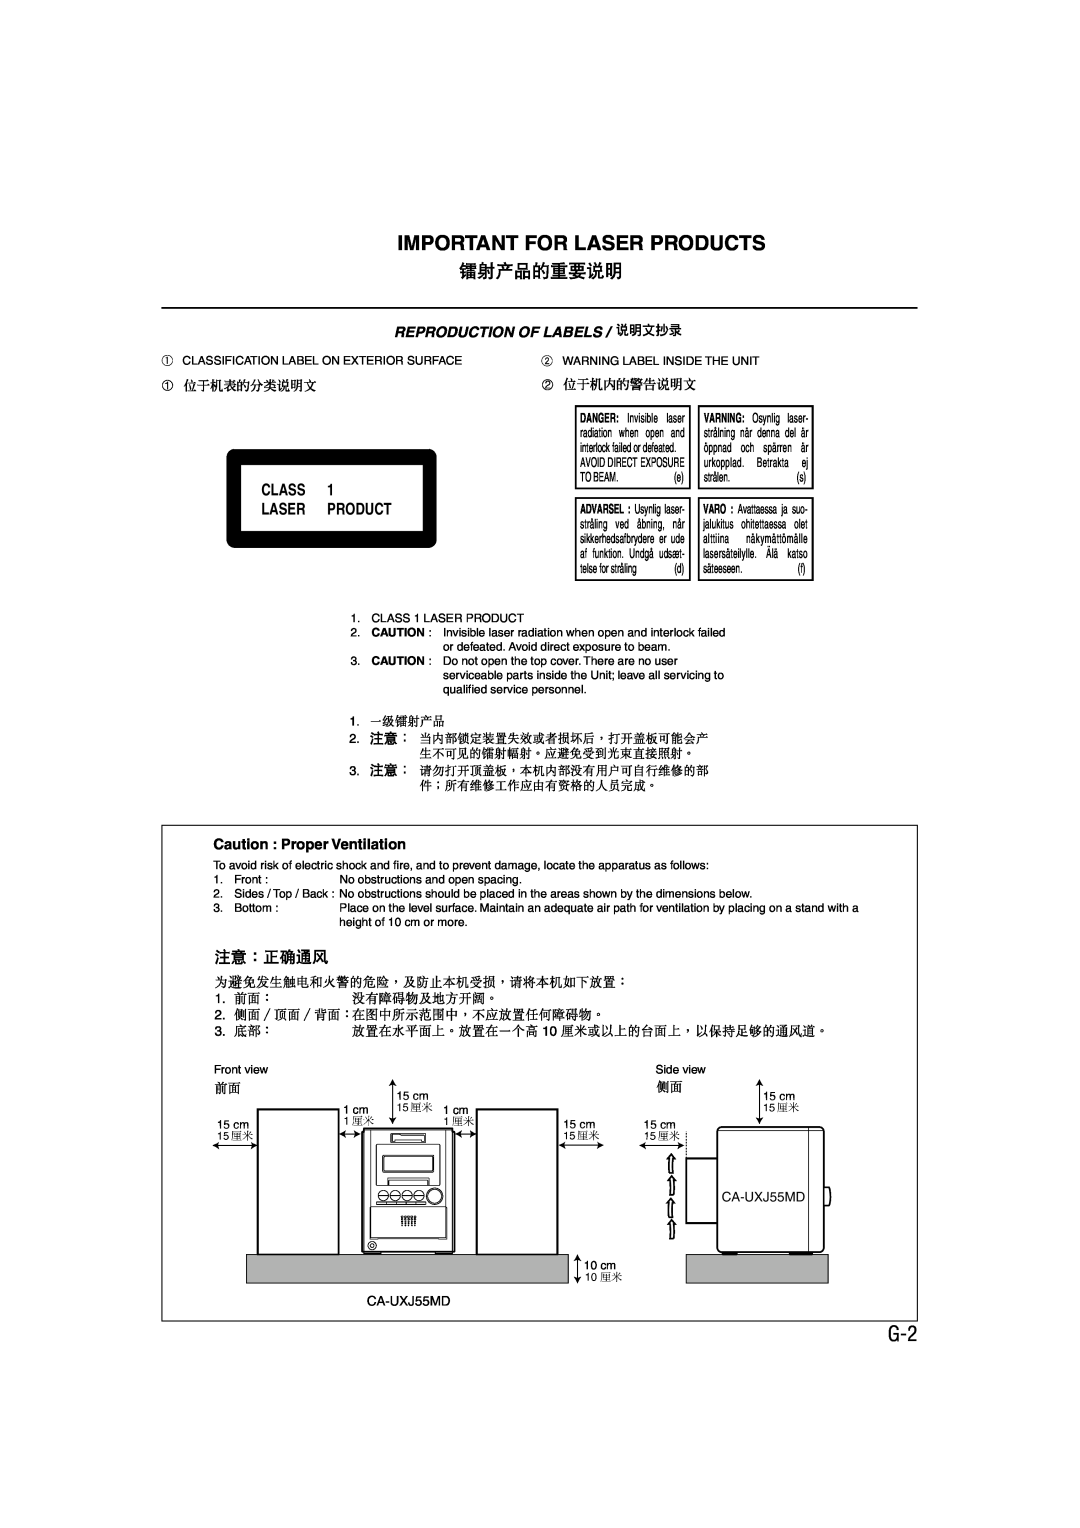 JVC CA-UXJ55MD manual Important For Laser Products, Class Laser Product, Caution Proper Ventilation, Reproduction Of Labels 